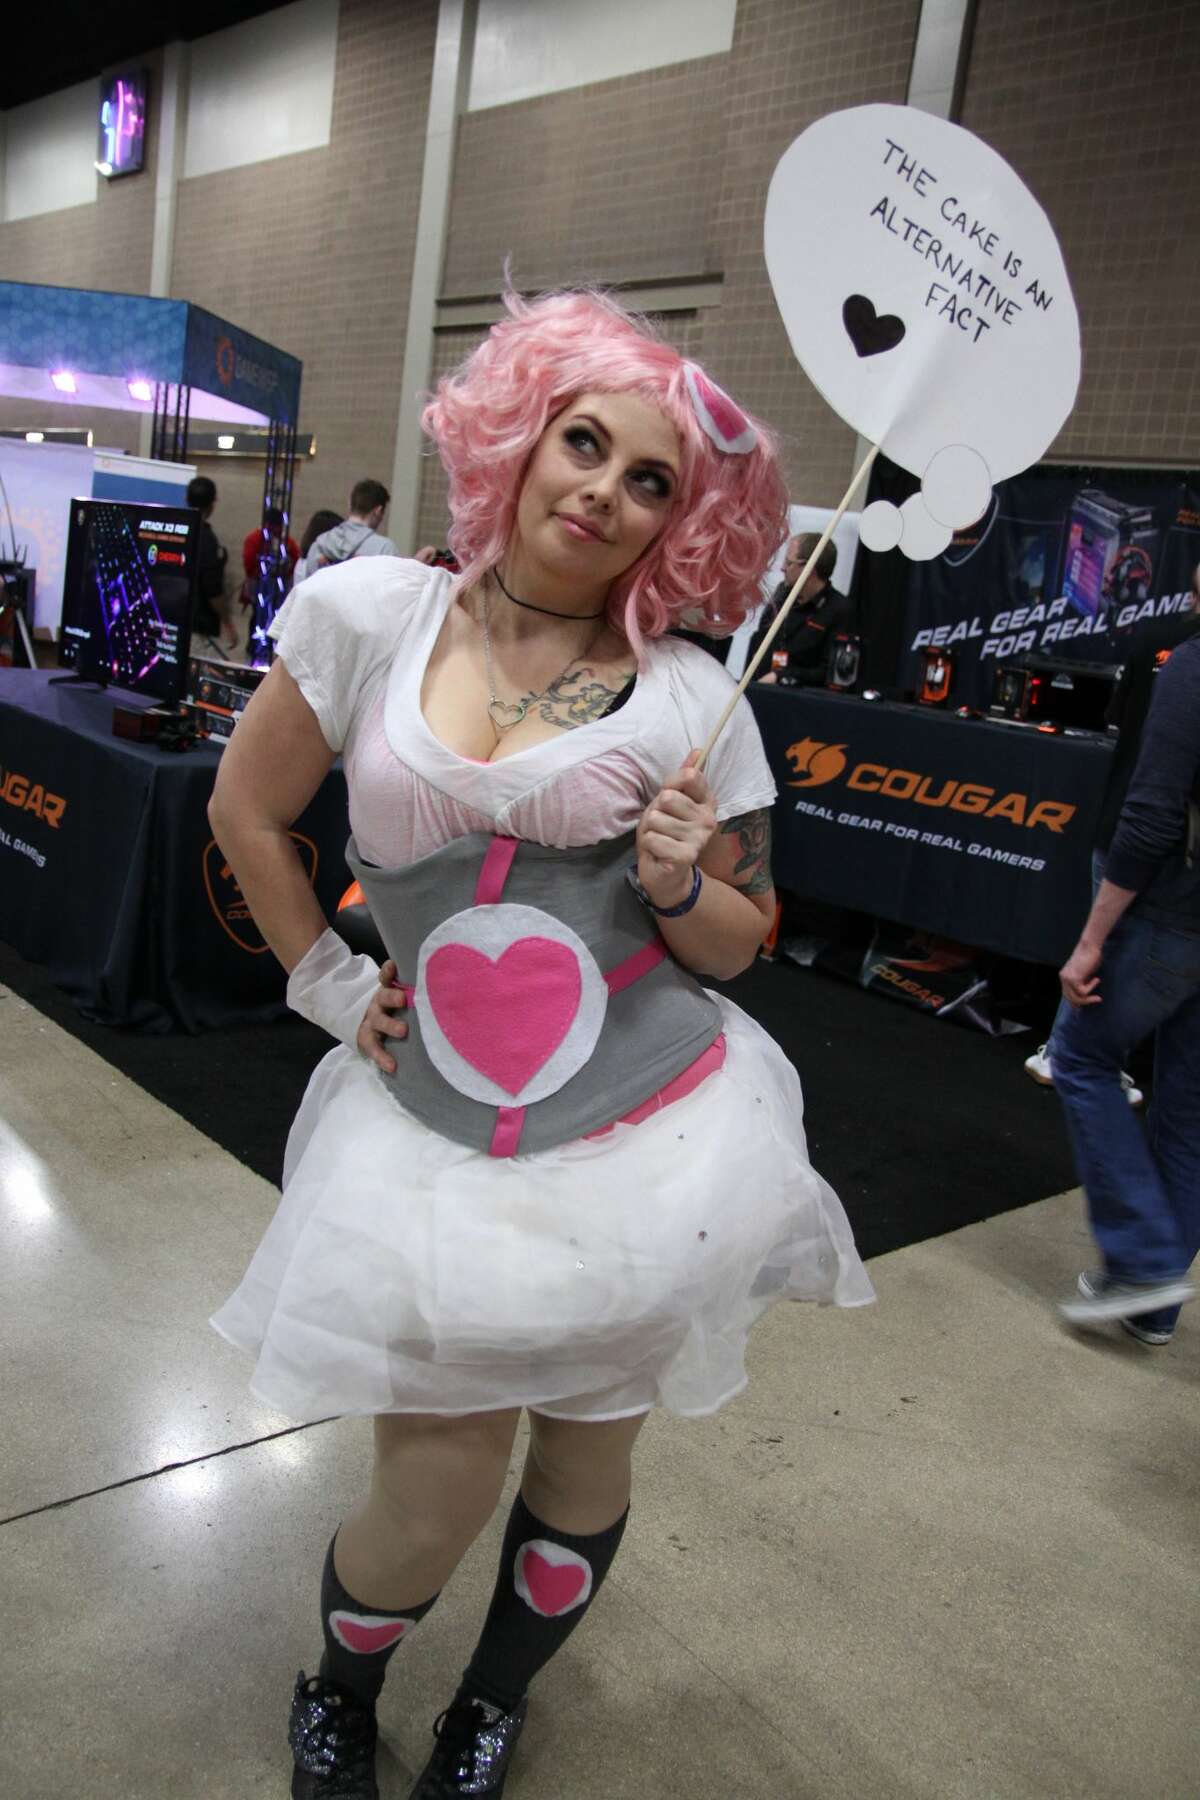 Thousands descended on the convention center Saturday, Jan. 28, 2017, for the annual PAX South video game convention. Gamers and fans alike took in a day of unlimited game play, as well as speaking sessions and other events focused on the gamer lifestyle.